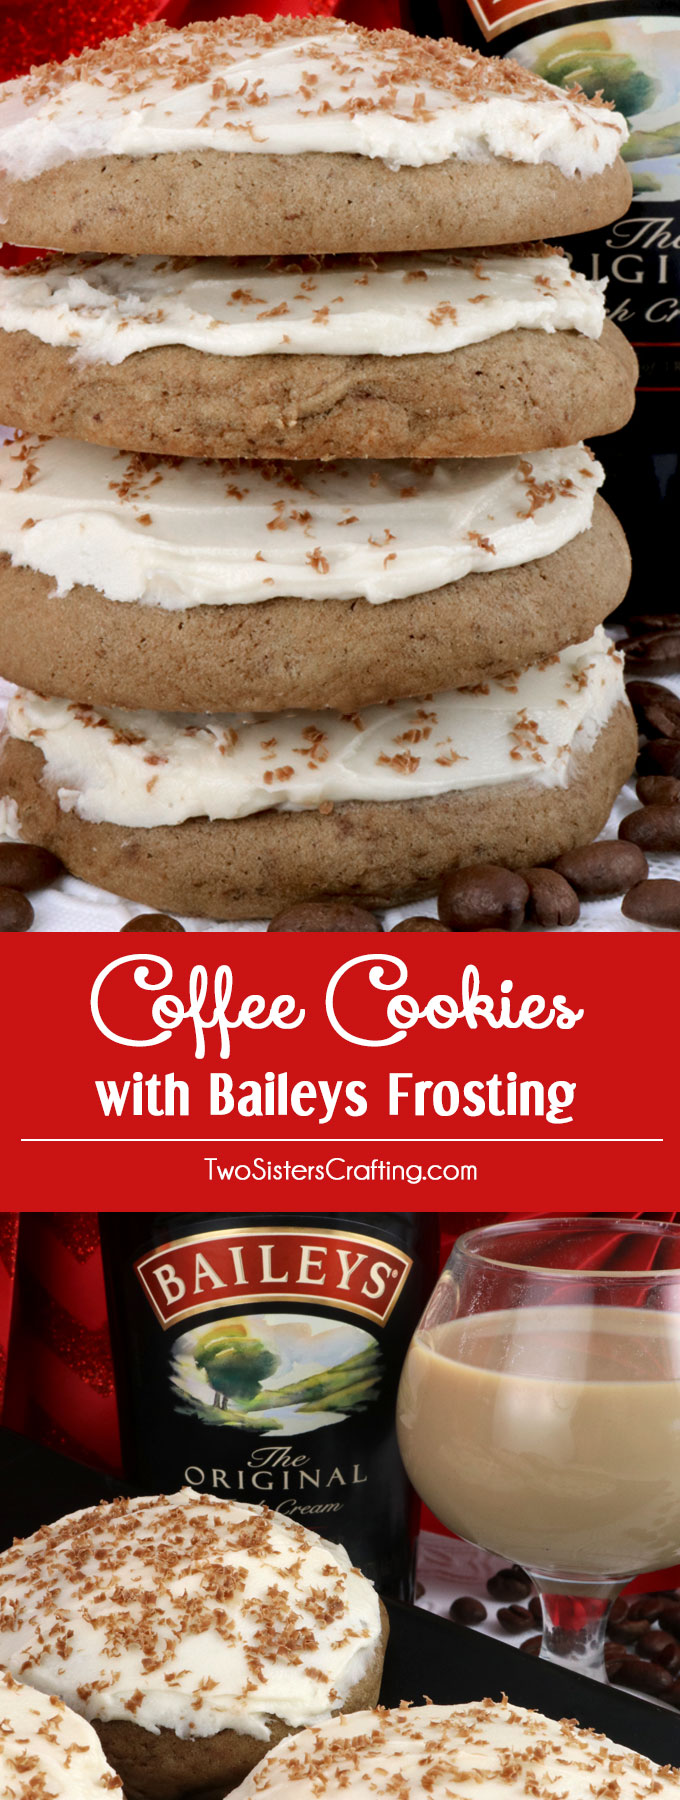 Coffee Cookies with Baileys Frosting - Two Sisters